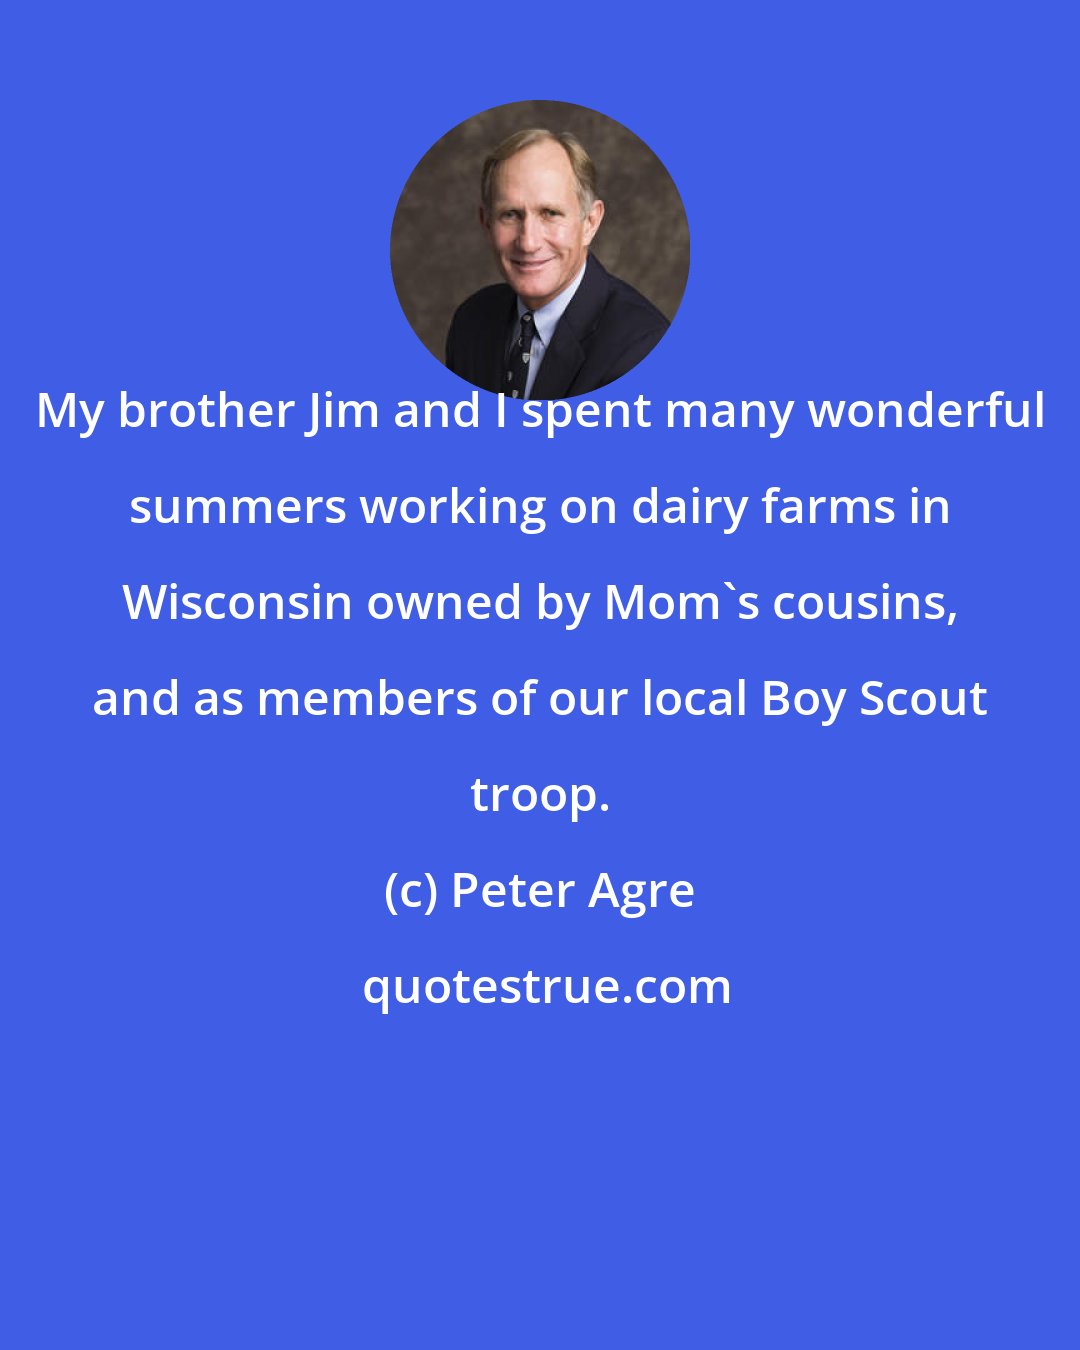 Peter Agre: My brother Jim and I spent many wonderful summers working on dairy farms in Wisconsin owned by Mom's cousins, and as members of our local Boy Scout troop.